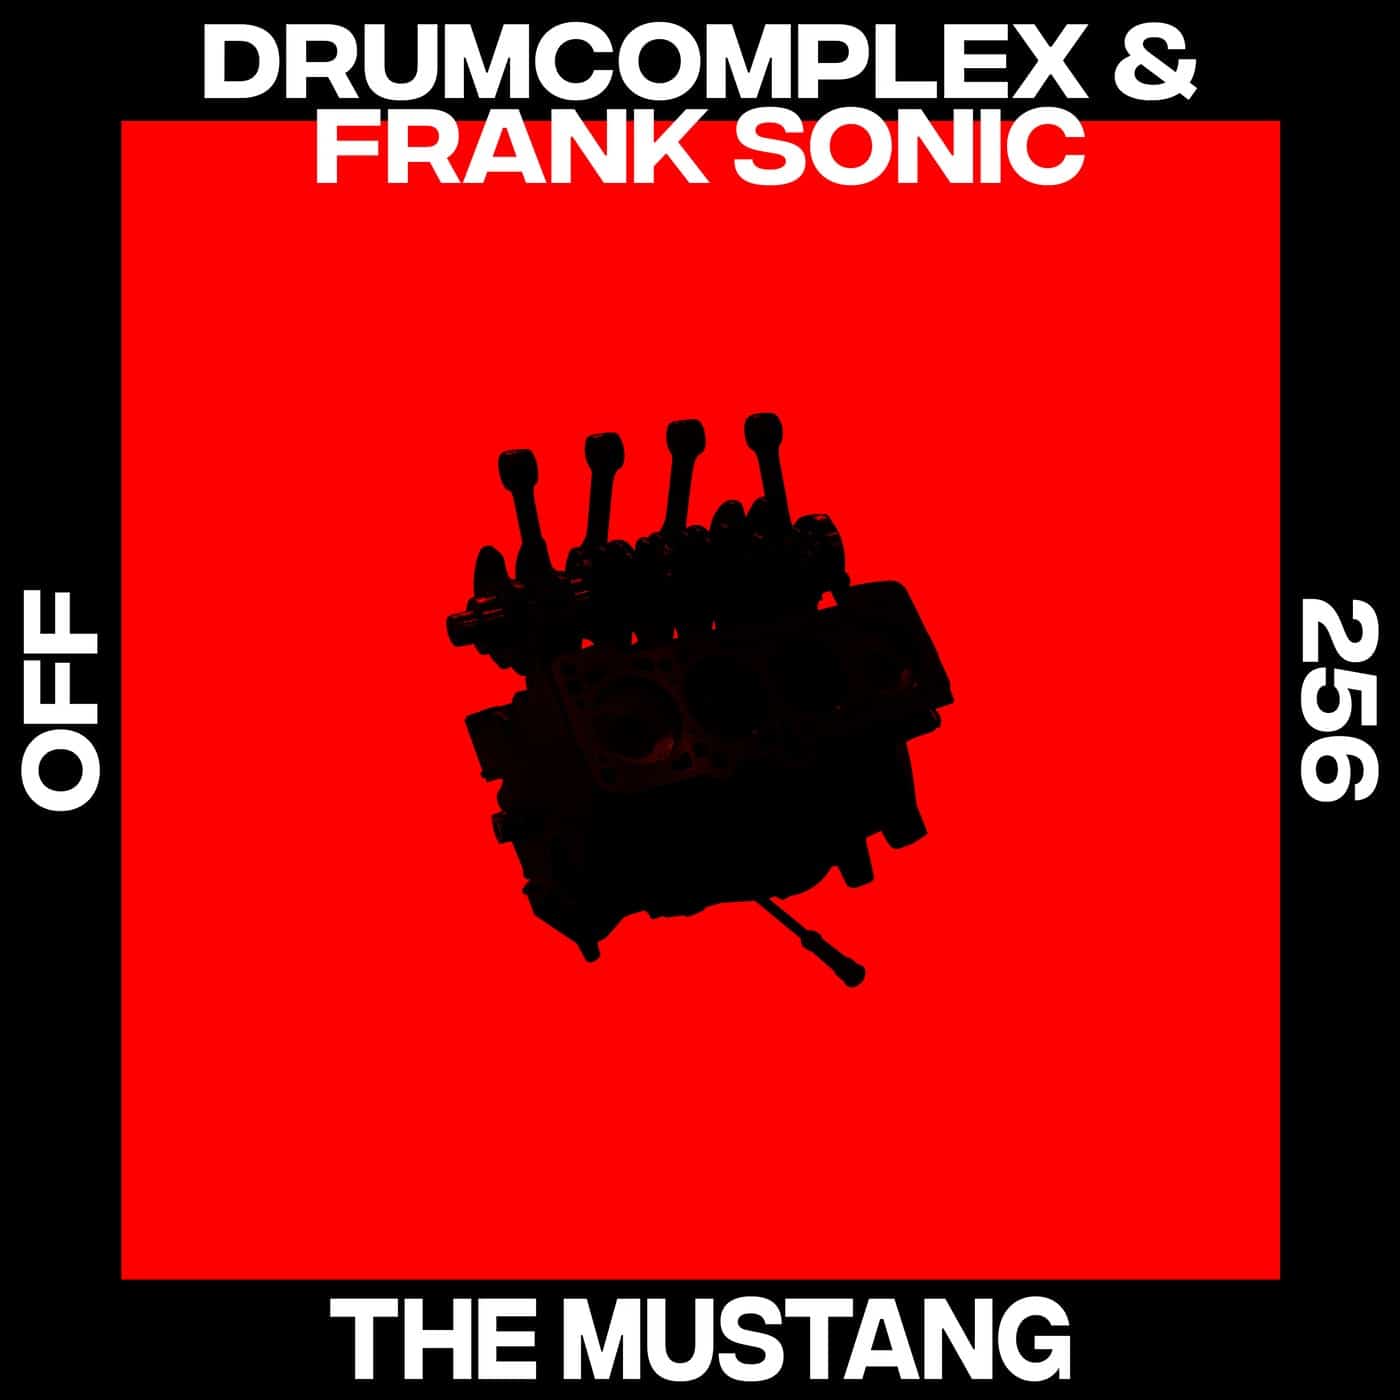 image cover: Drumcomplex, Frank Sonic - The Mustang / OFF256